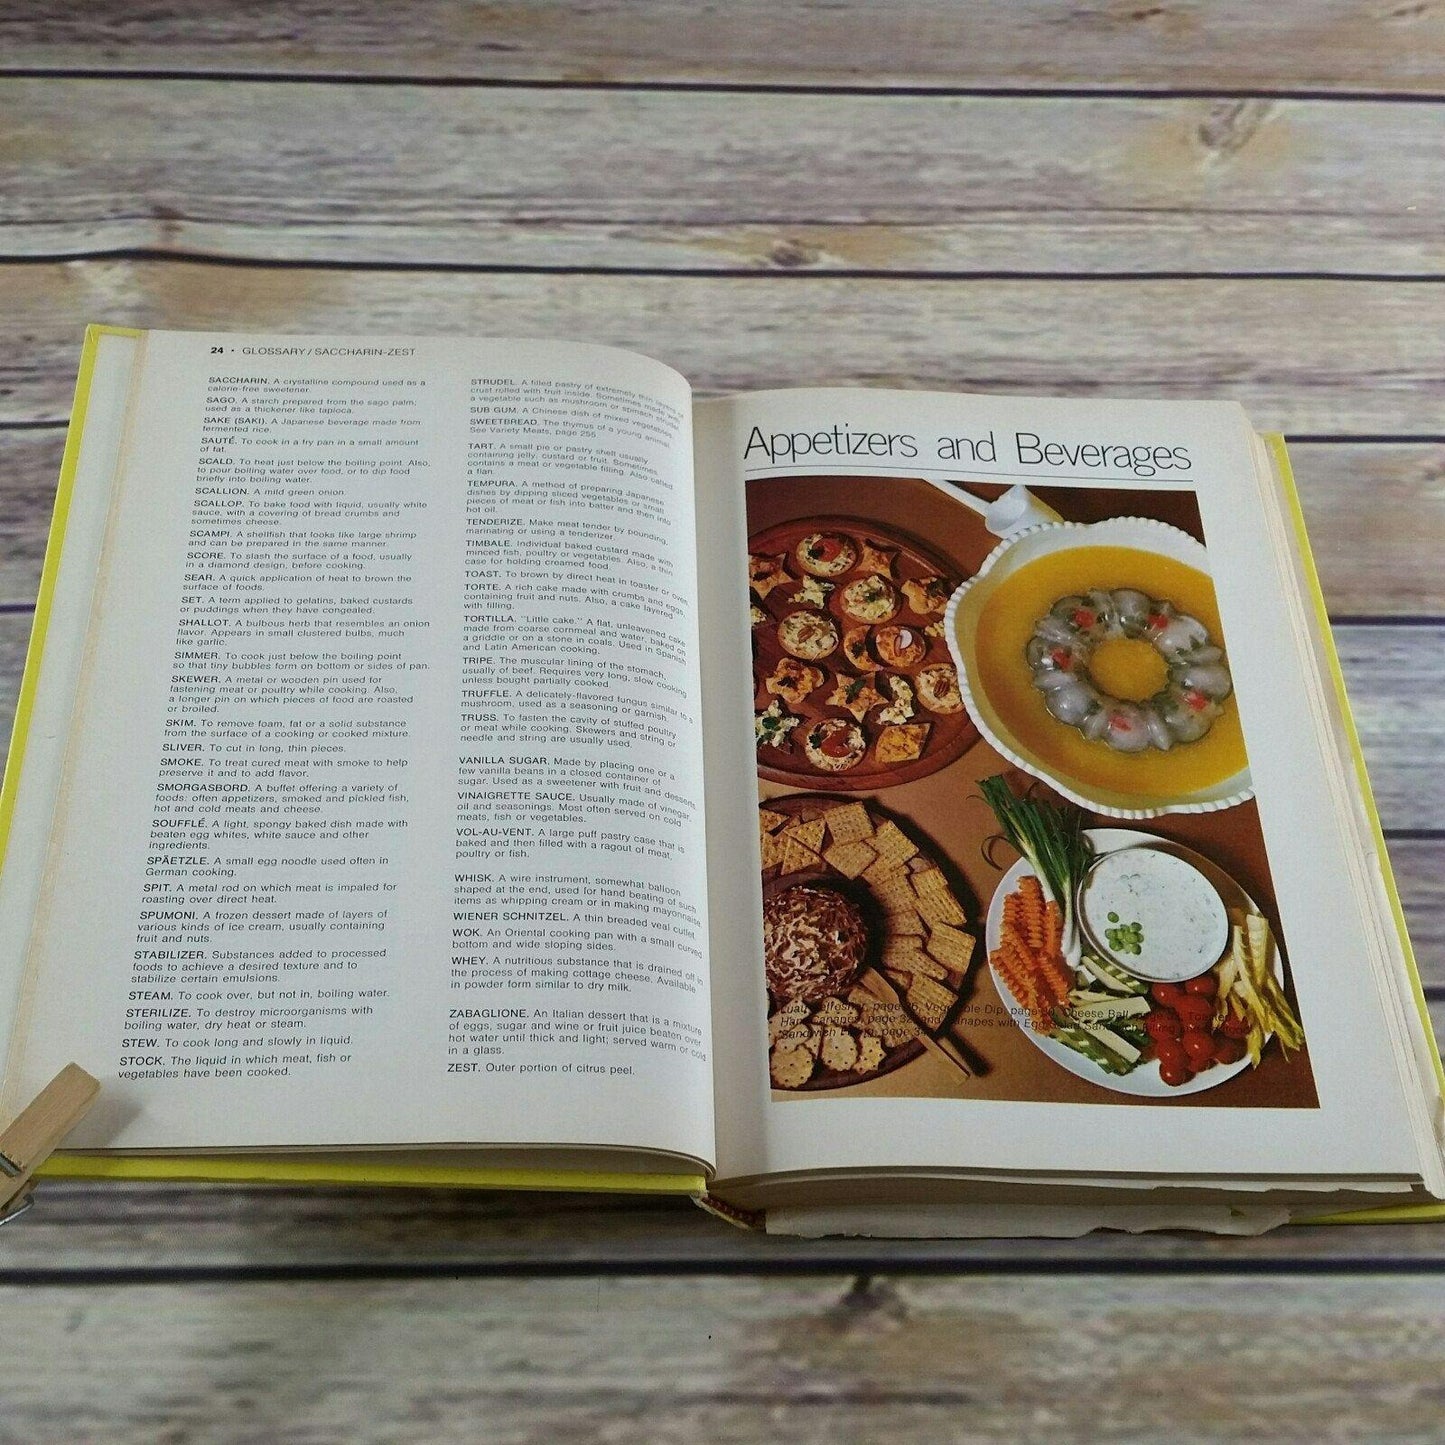 Vintage Cookbook The New Pillsbury Family Cookbook Recipes 1973 Hardcover Book NO Dust Jacket